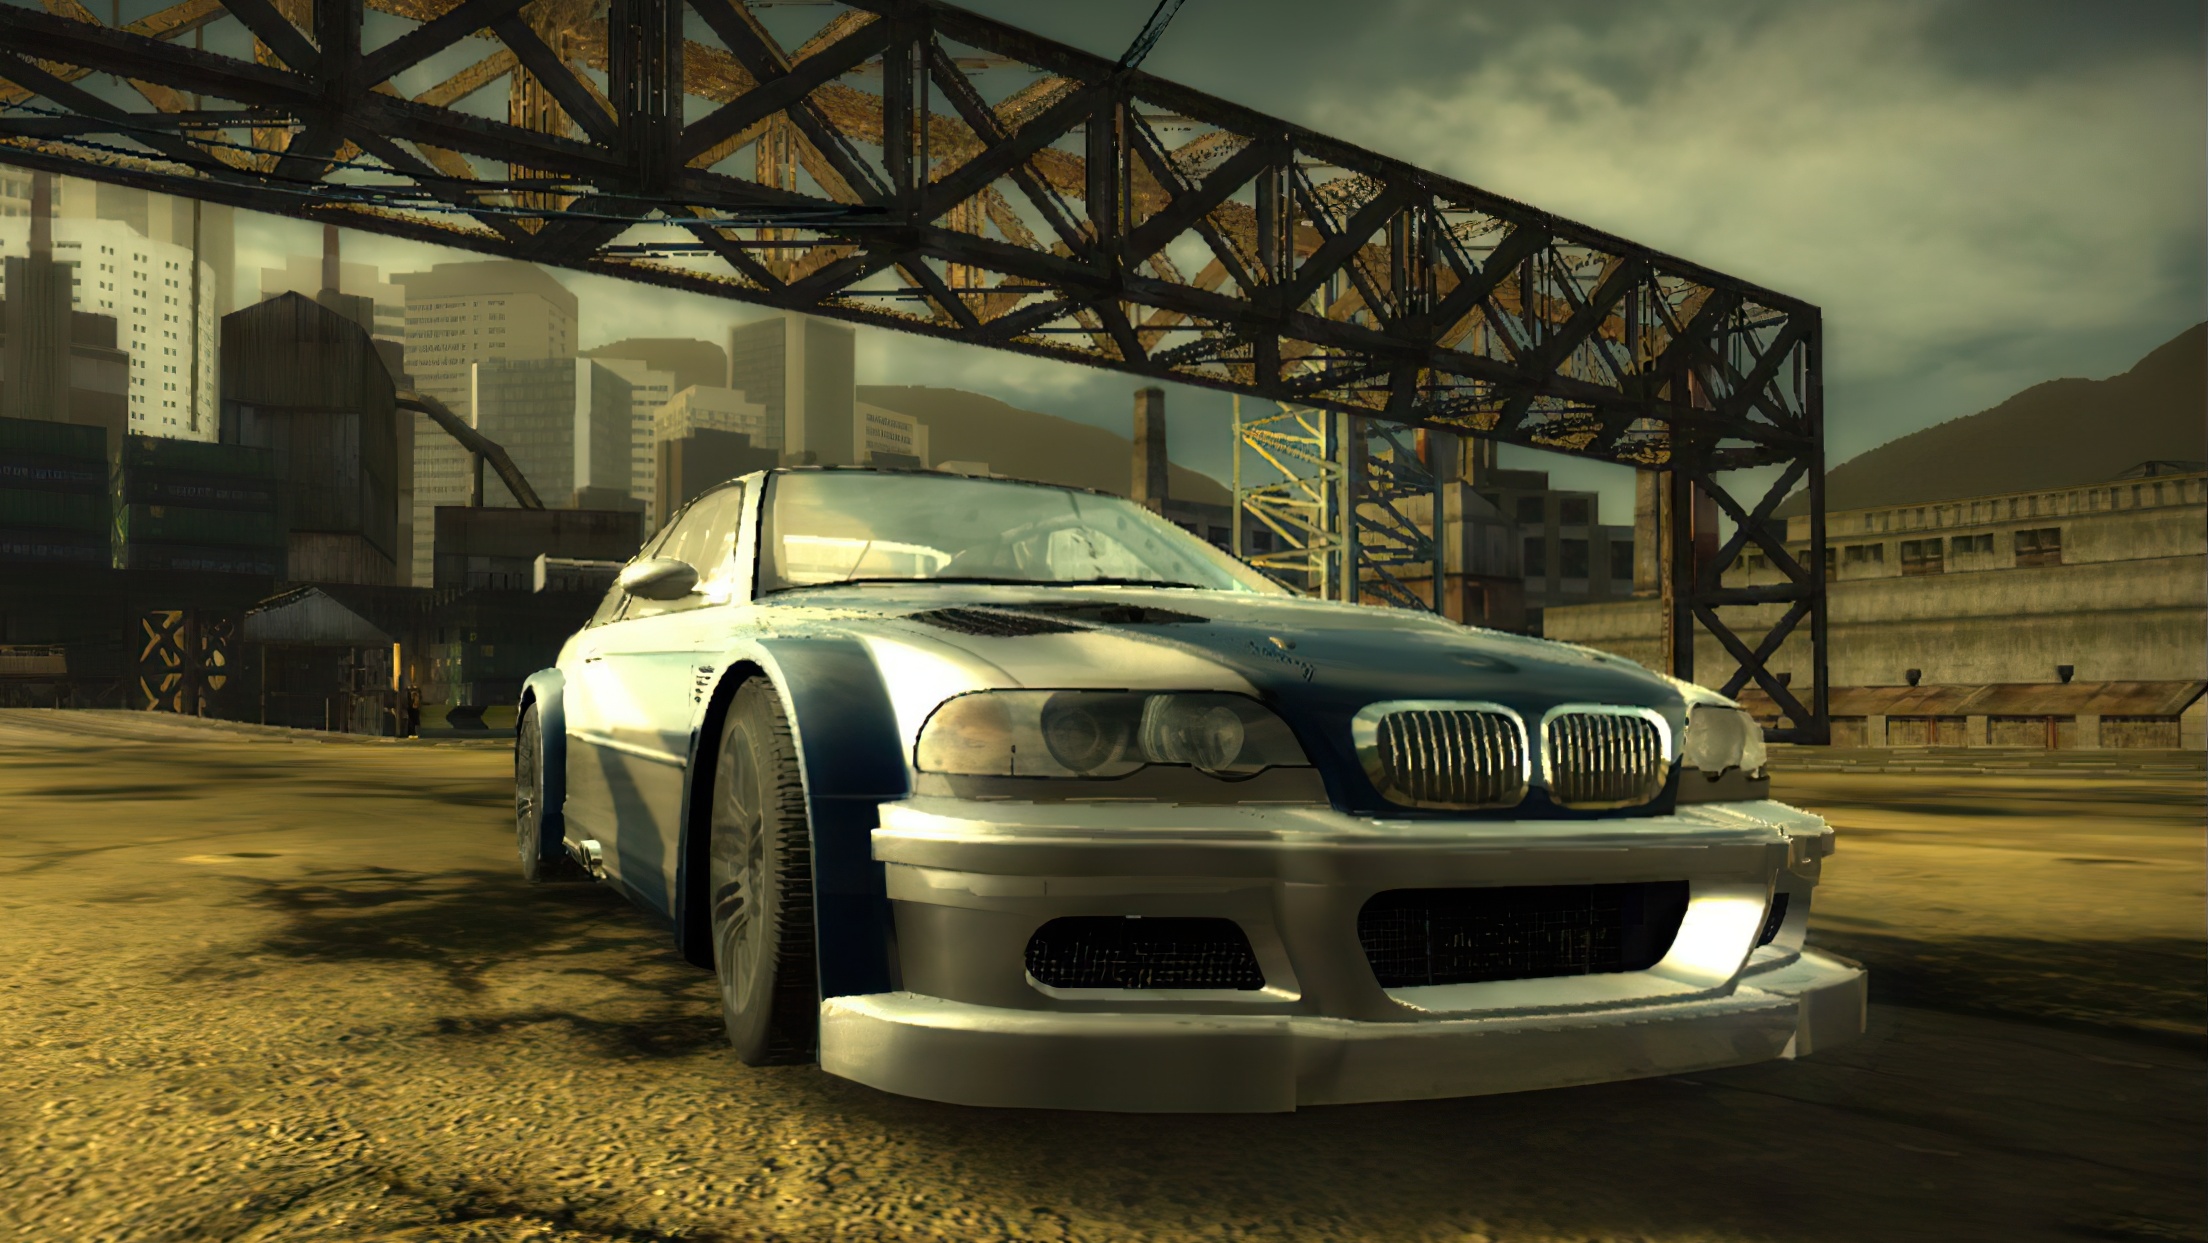 BMW m3 GTR. Need for Speed most wanted 2005. Нид фор СПИД most wanted 2005. Нфс МВ 2005. Машины в игре most wanted